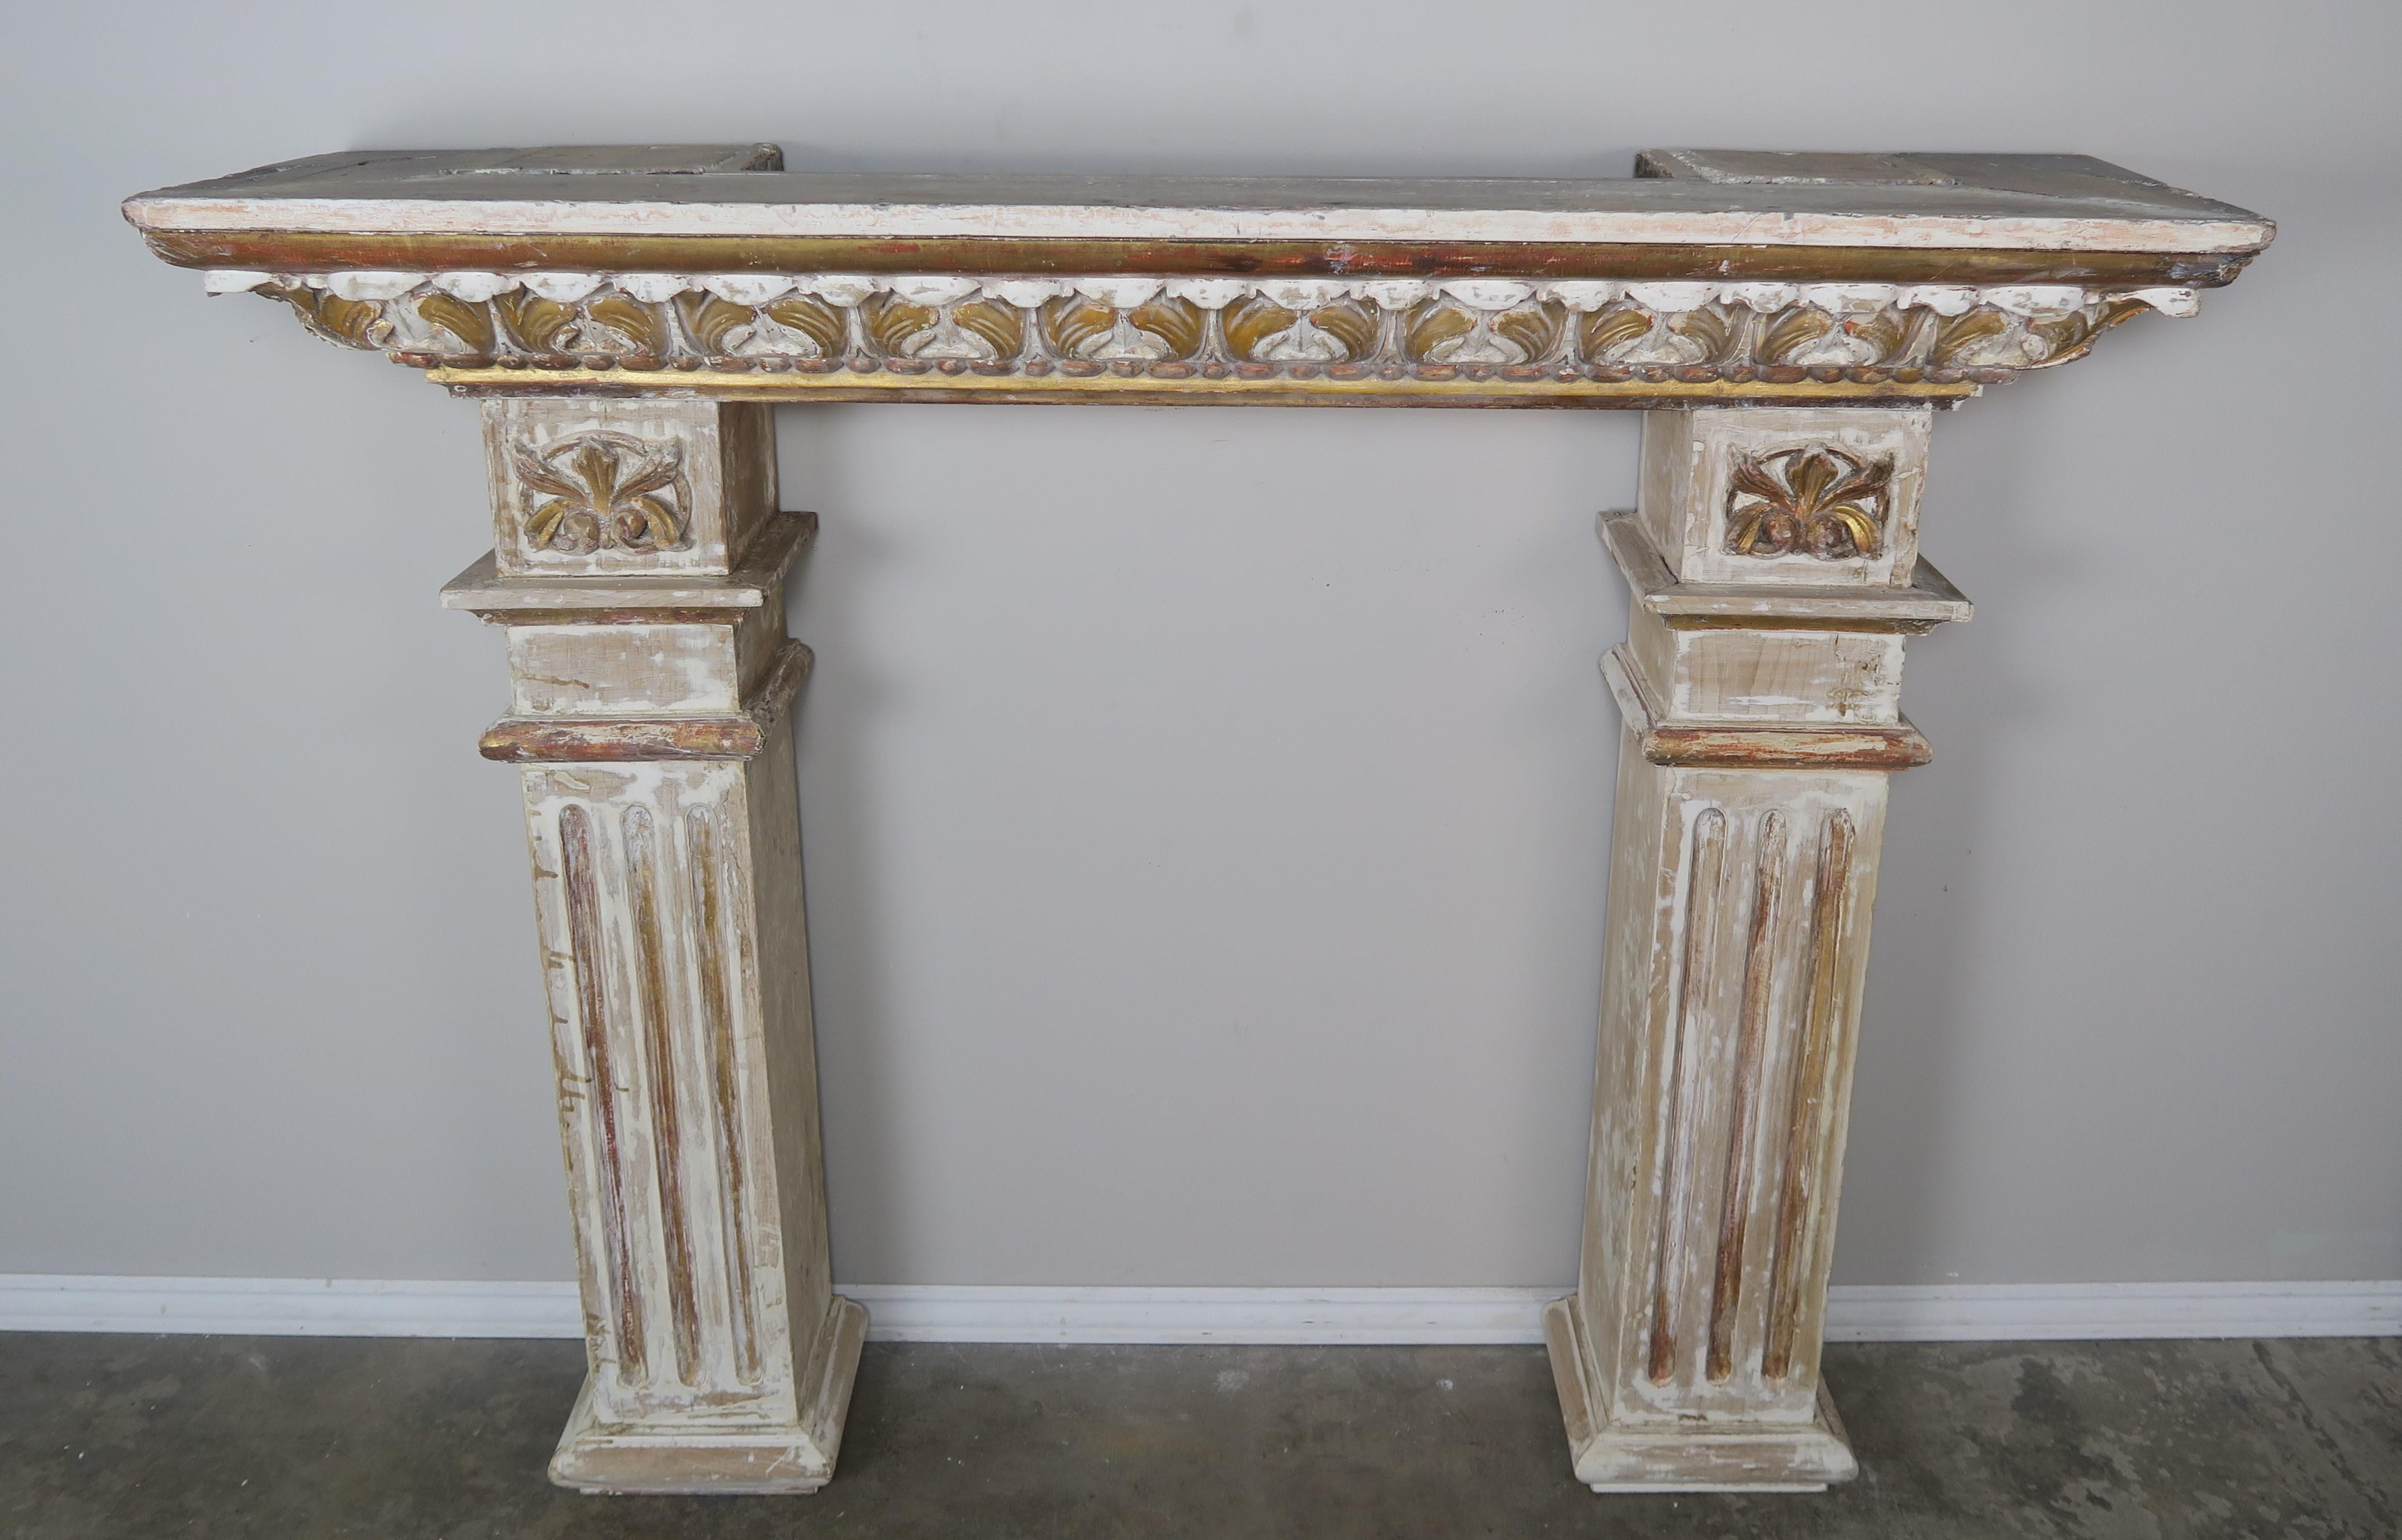 Neoclassical 19th Century Italian Painted and Parcel Gilt Fireplace Mantel For Sale